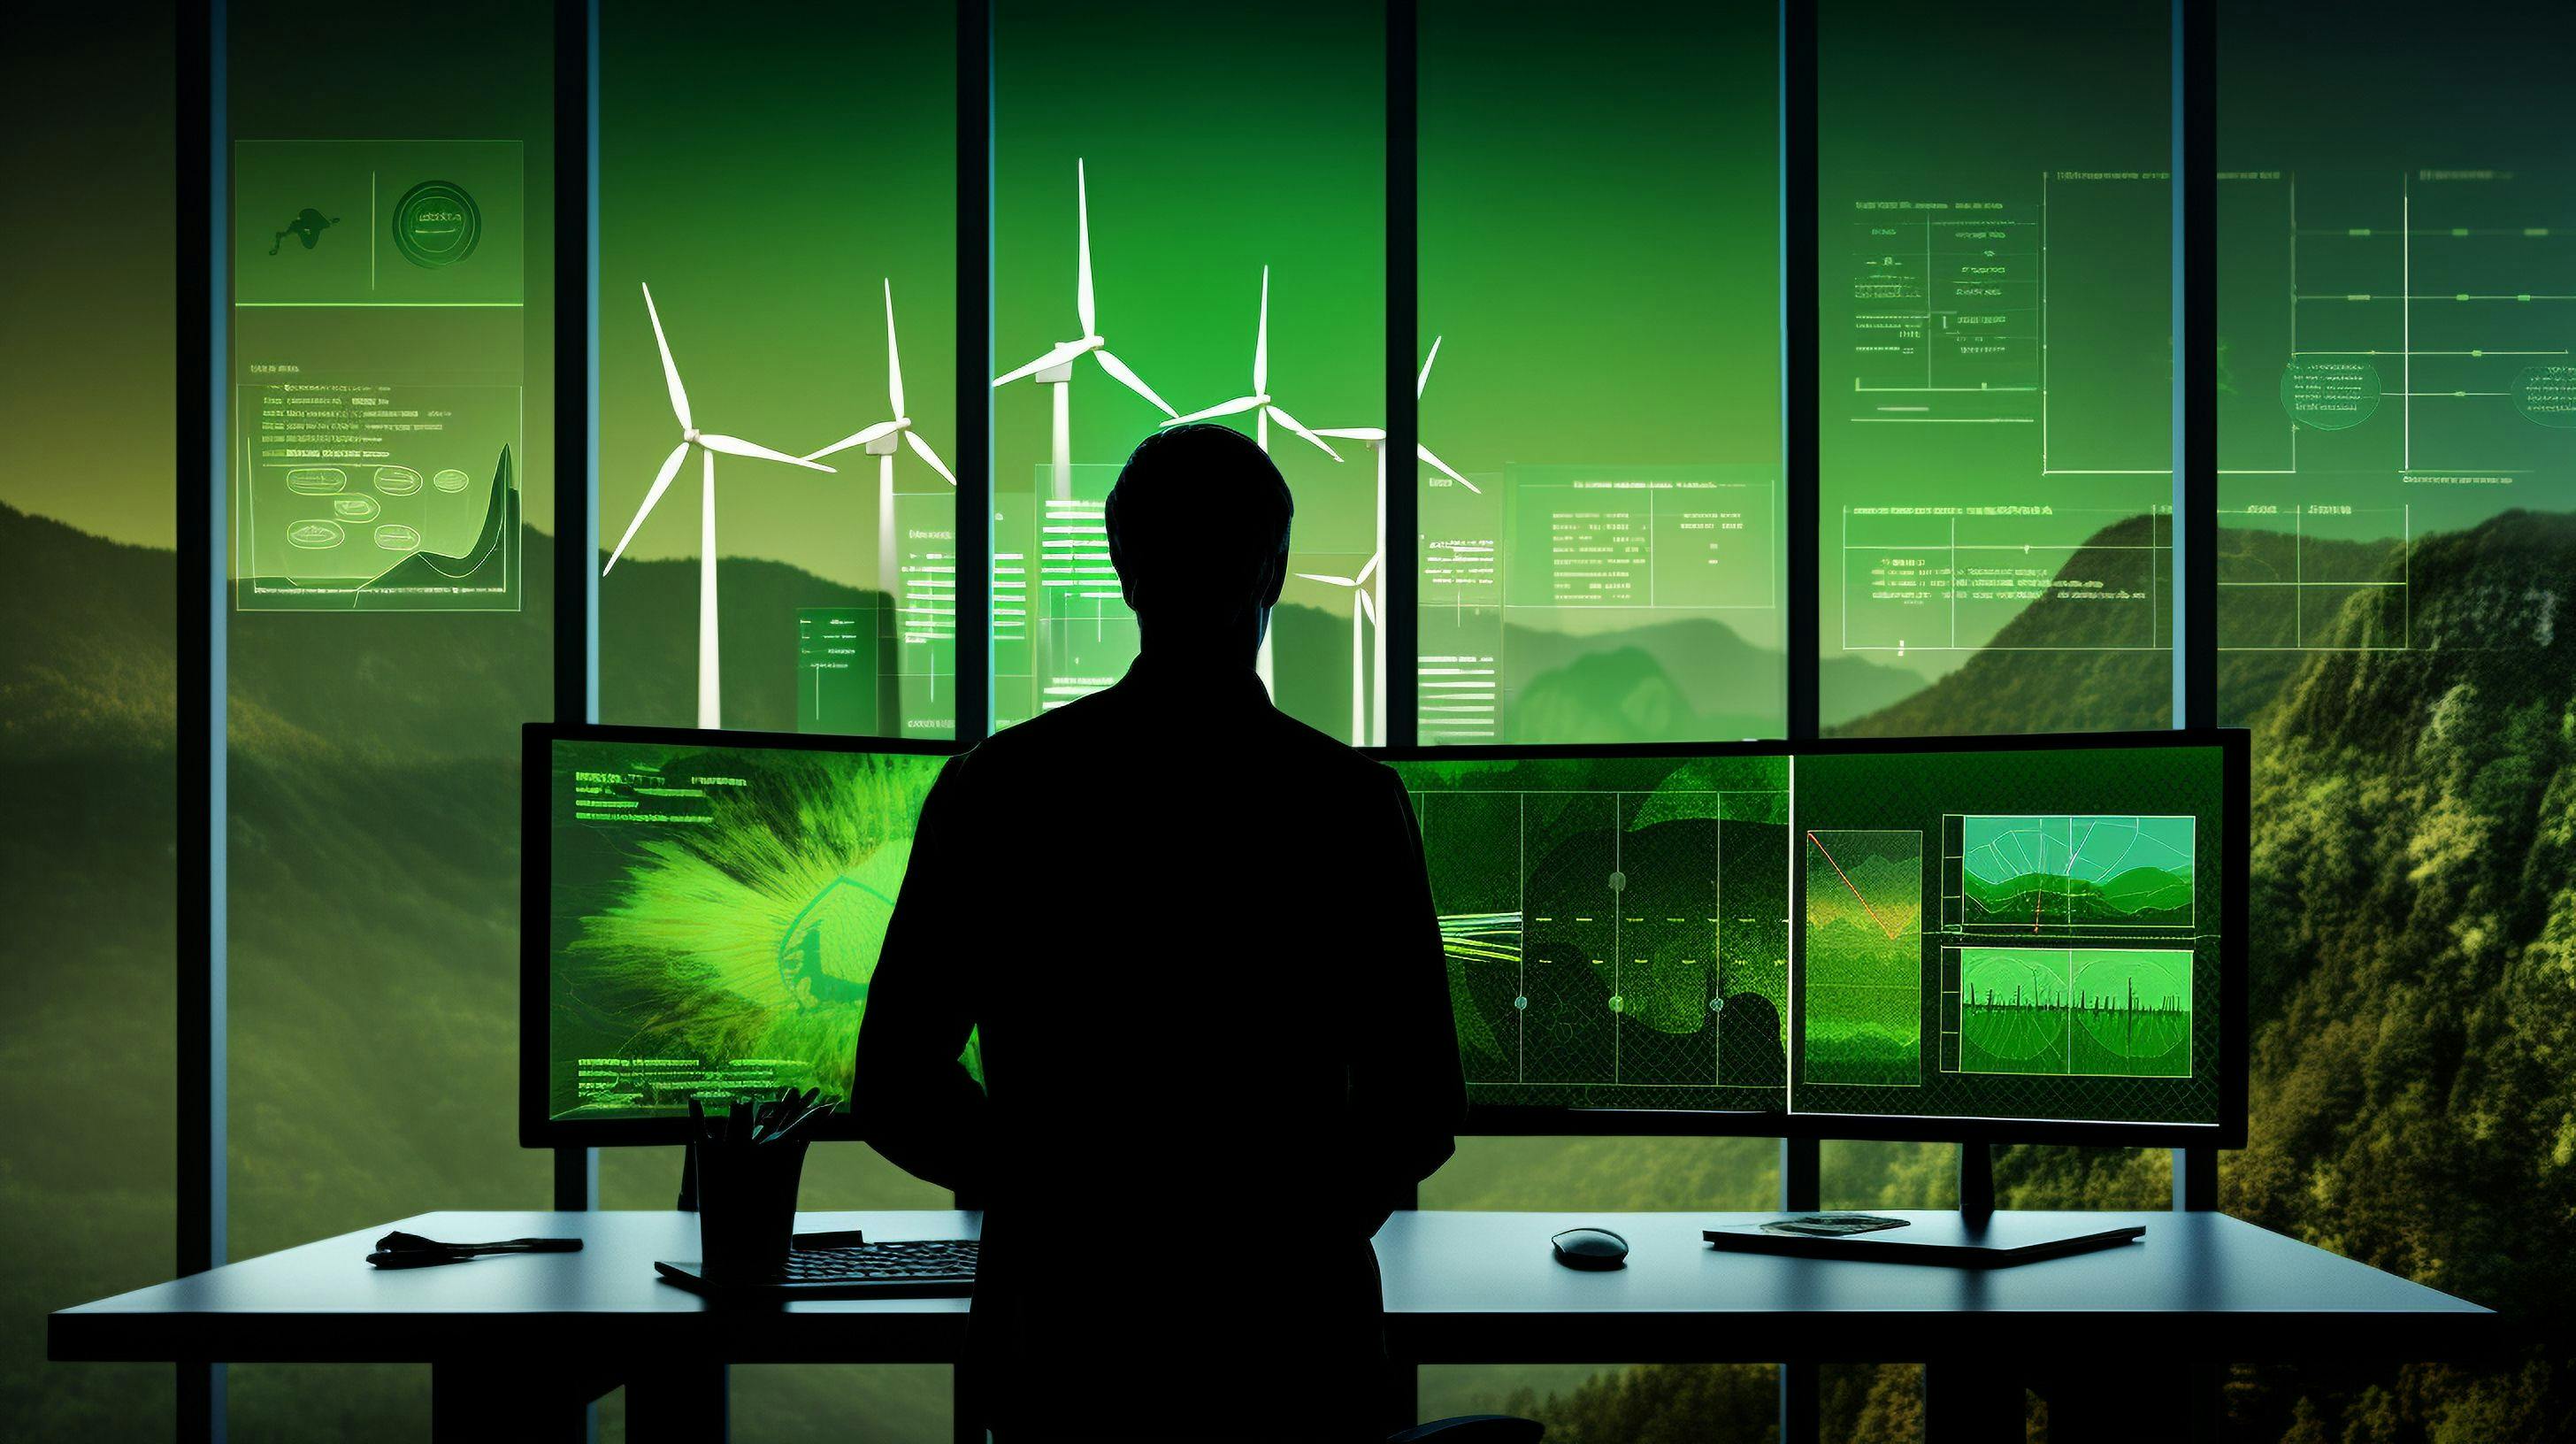 sustainability researcher with a backdrop of green energy sources and data analytics screens | Image Credit: © 1st footage - stock.adobe.com